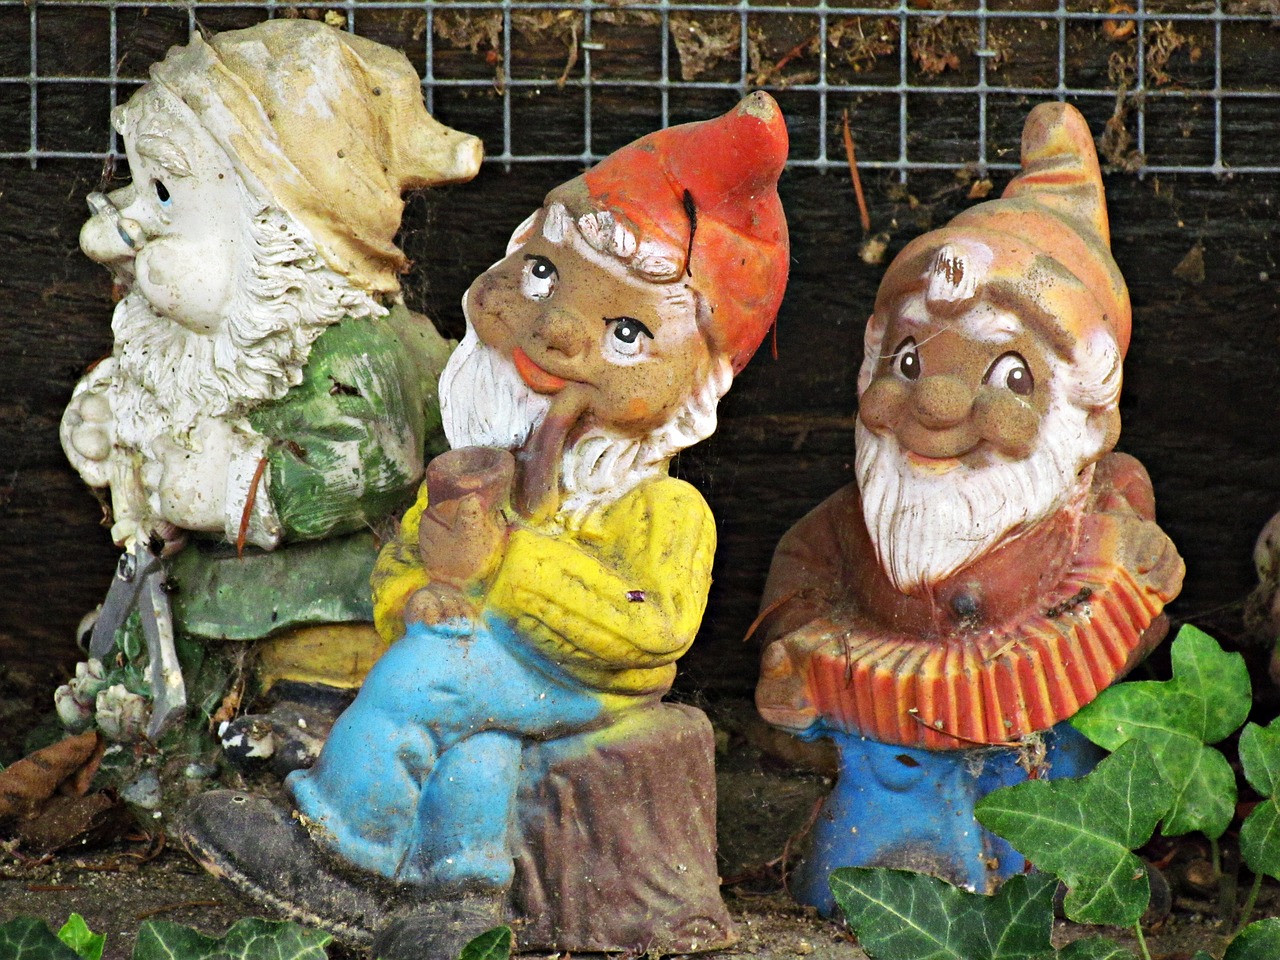 dwarves the gnomes figurines free photo